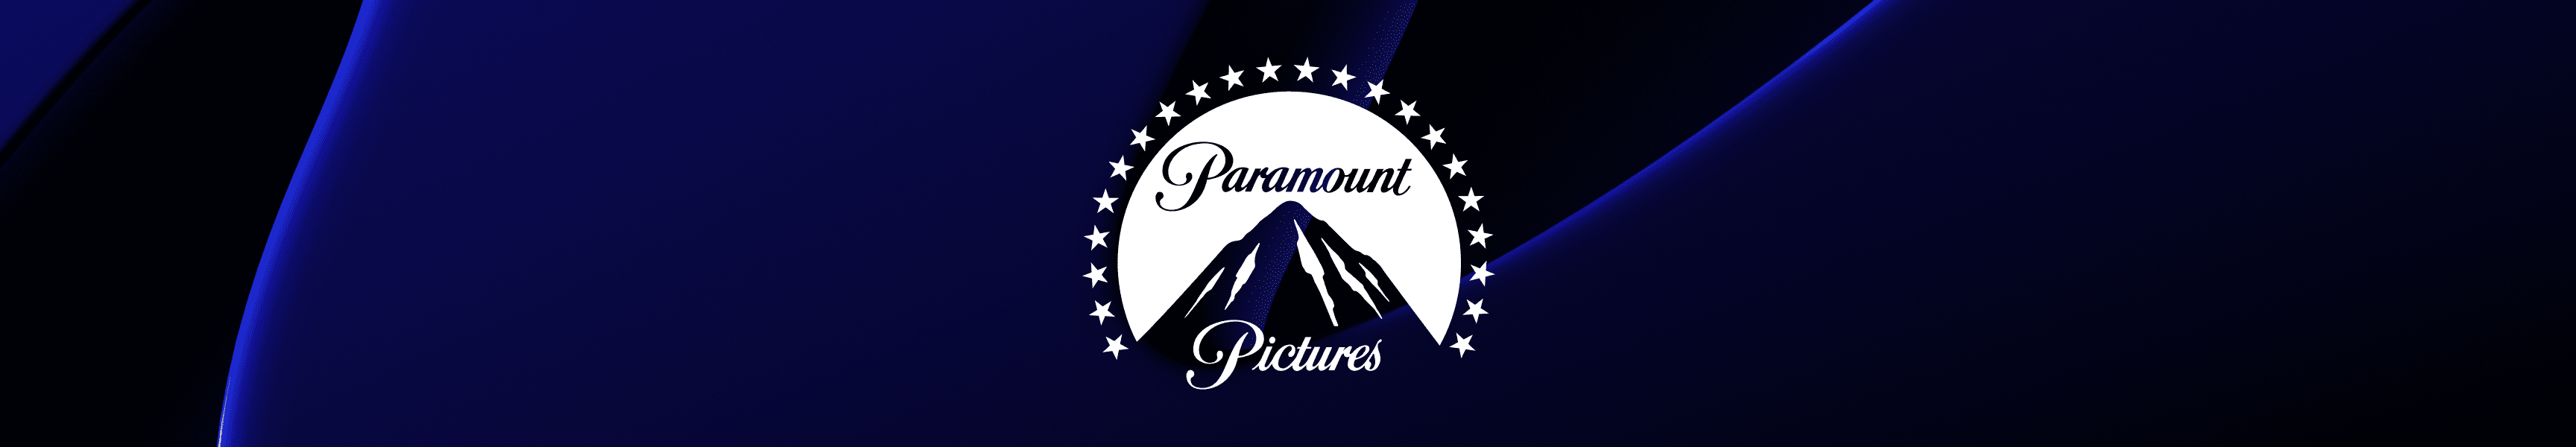 Paramount Pictures Jouets